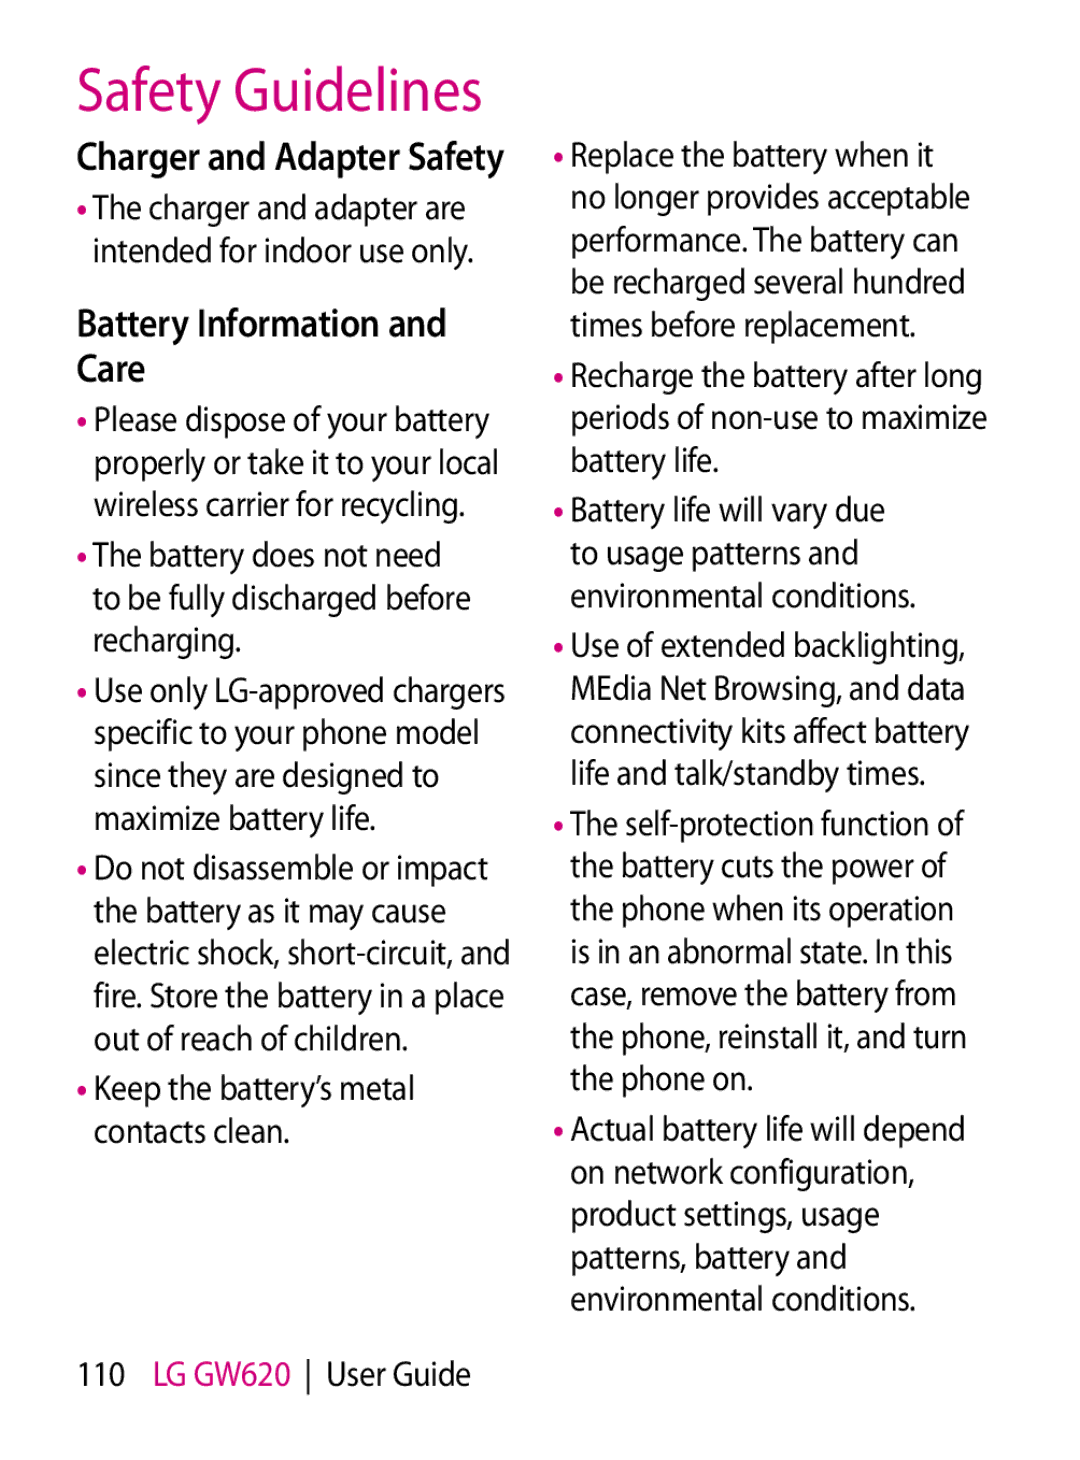 Mitel GW620 manual Battery Information and Care 